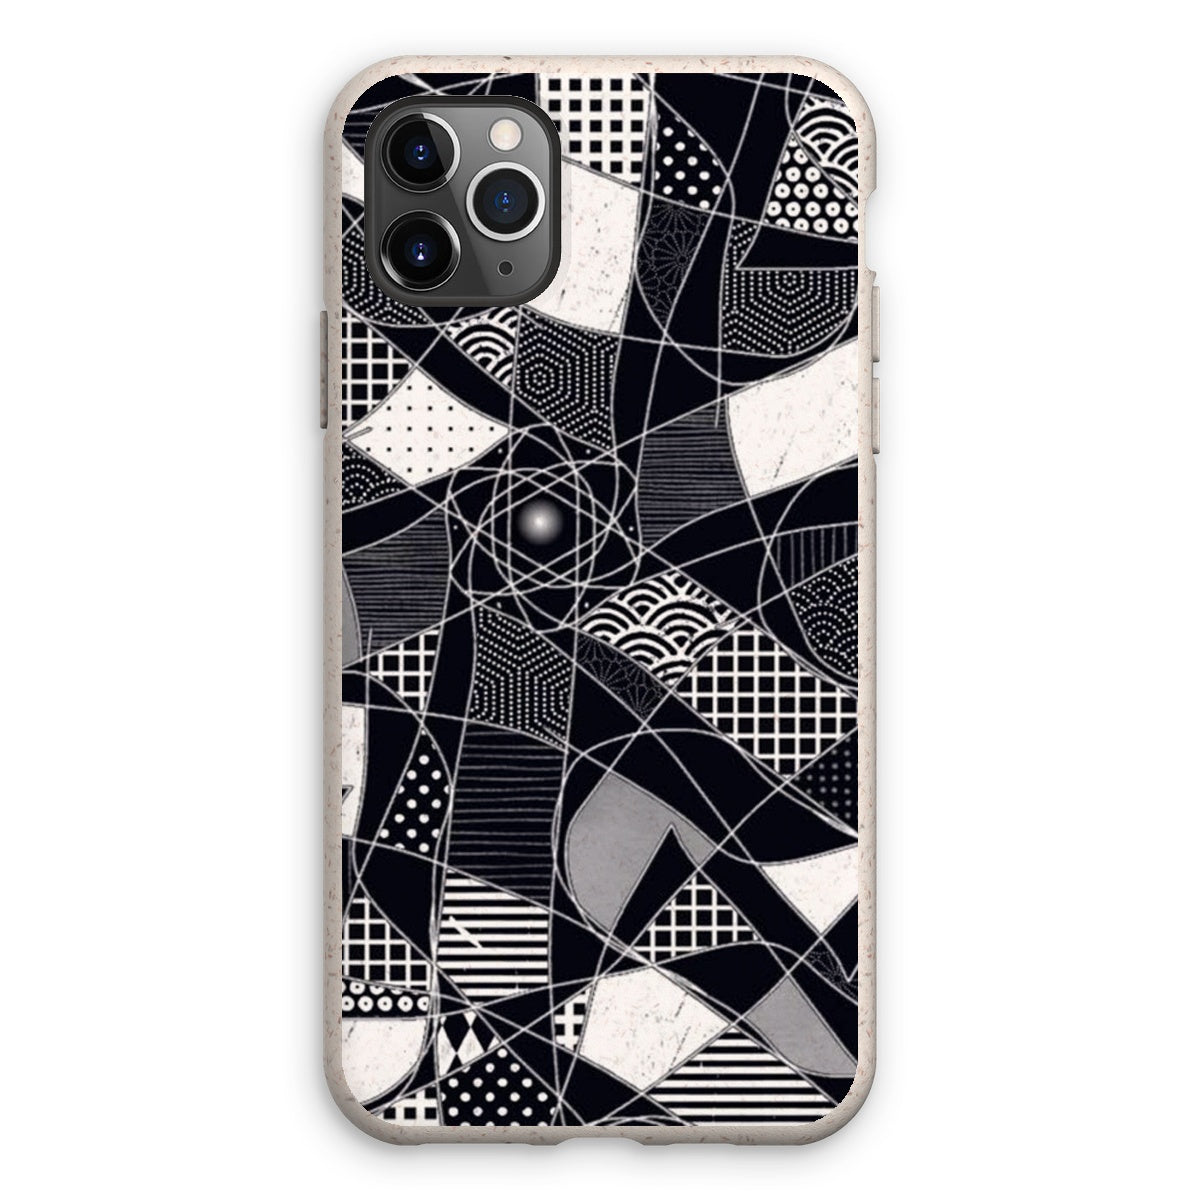 The Pattern Eco Phone Case